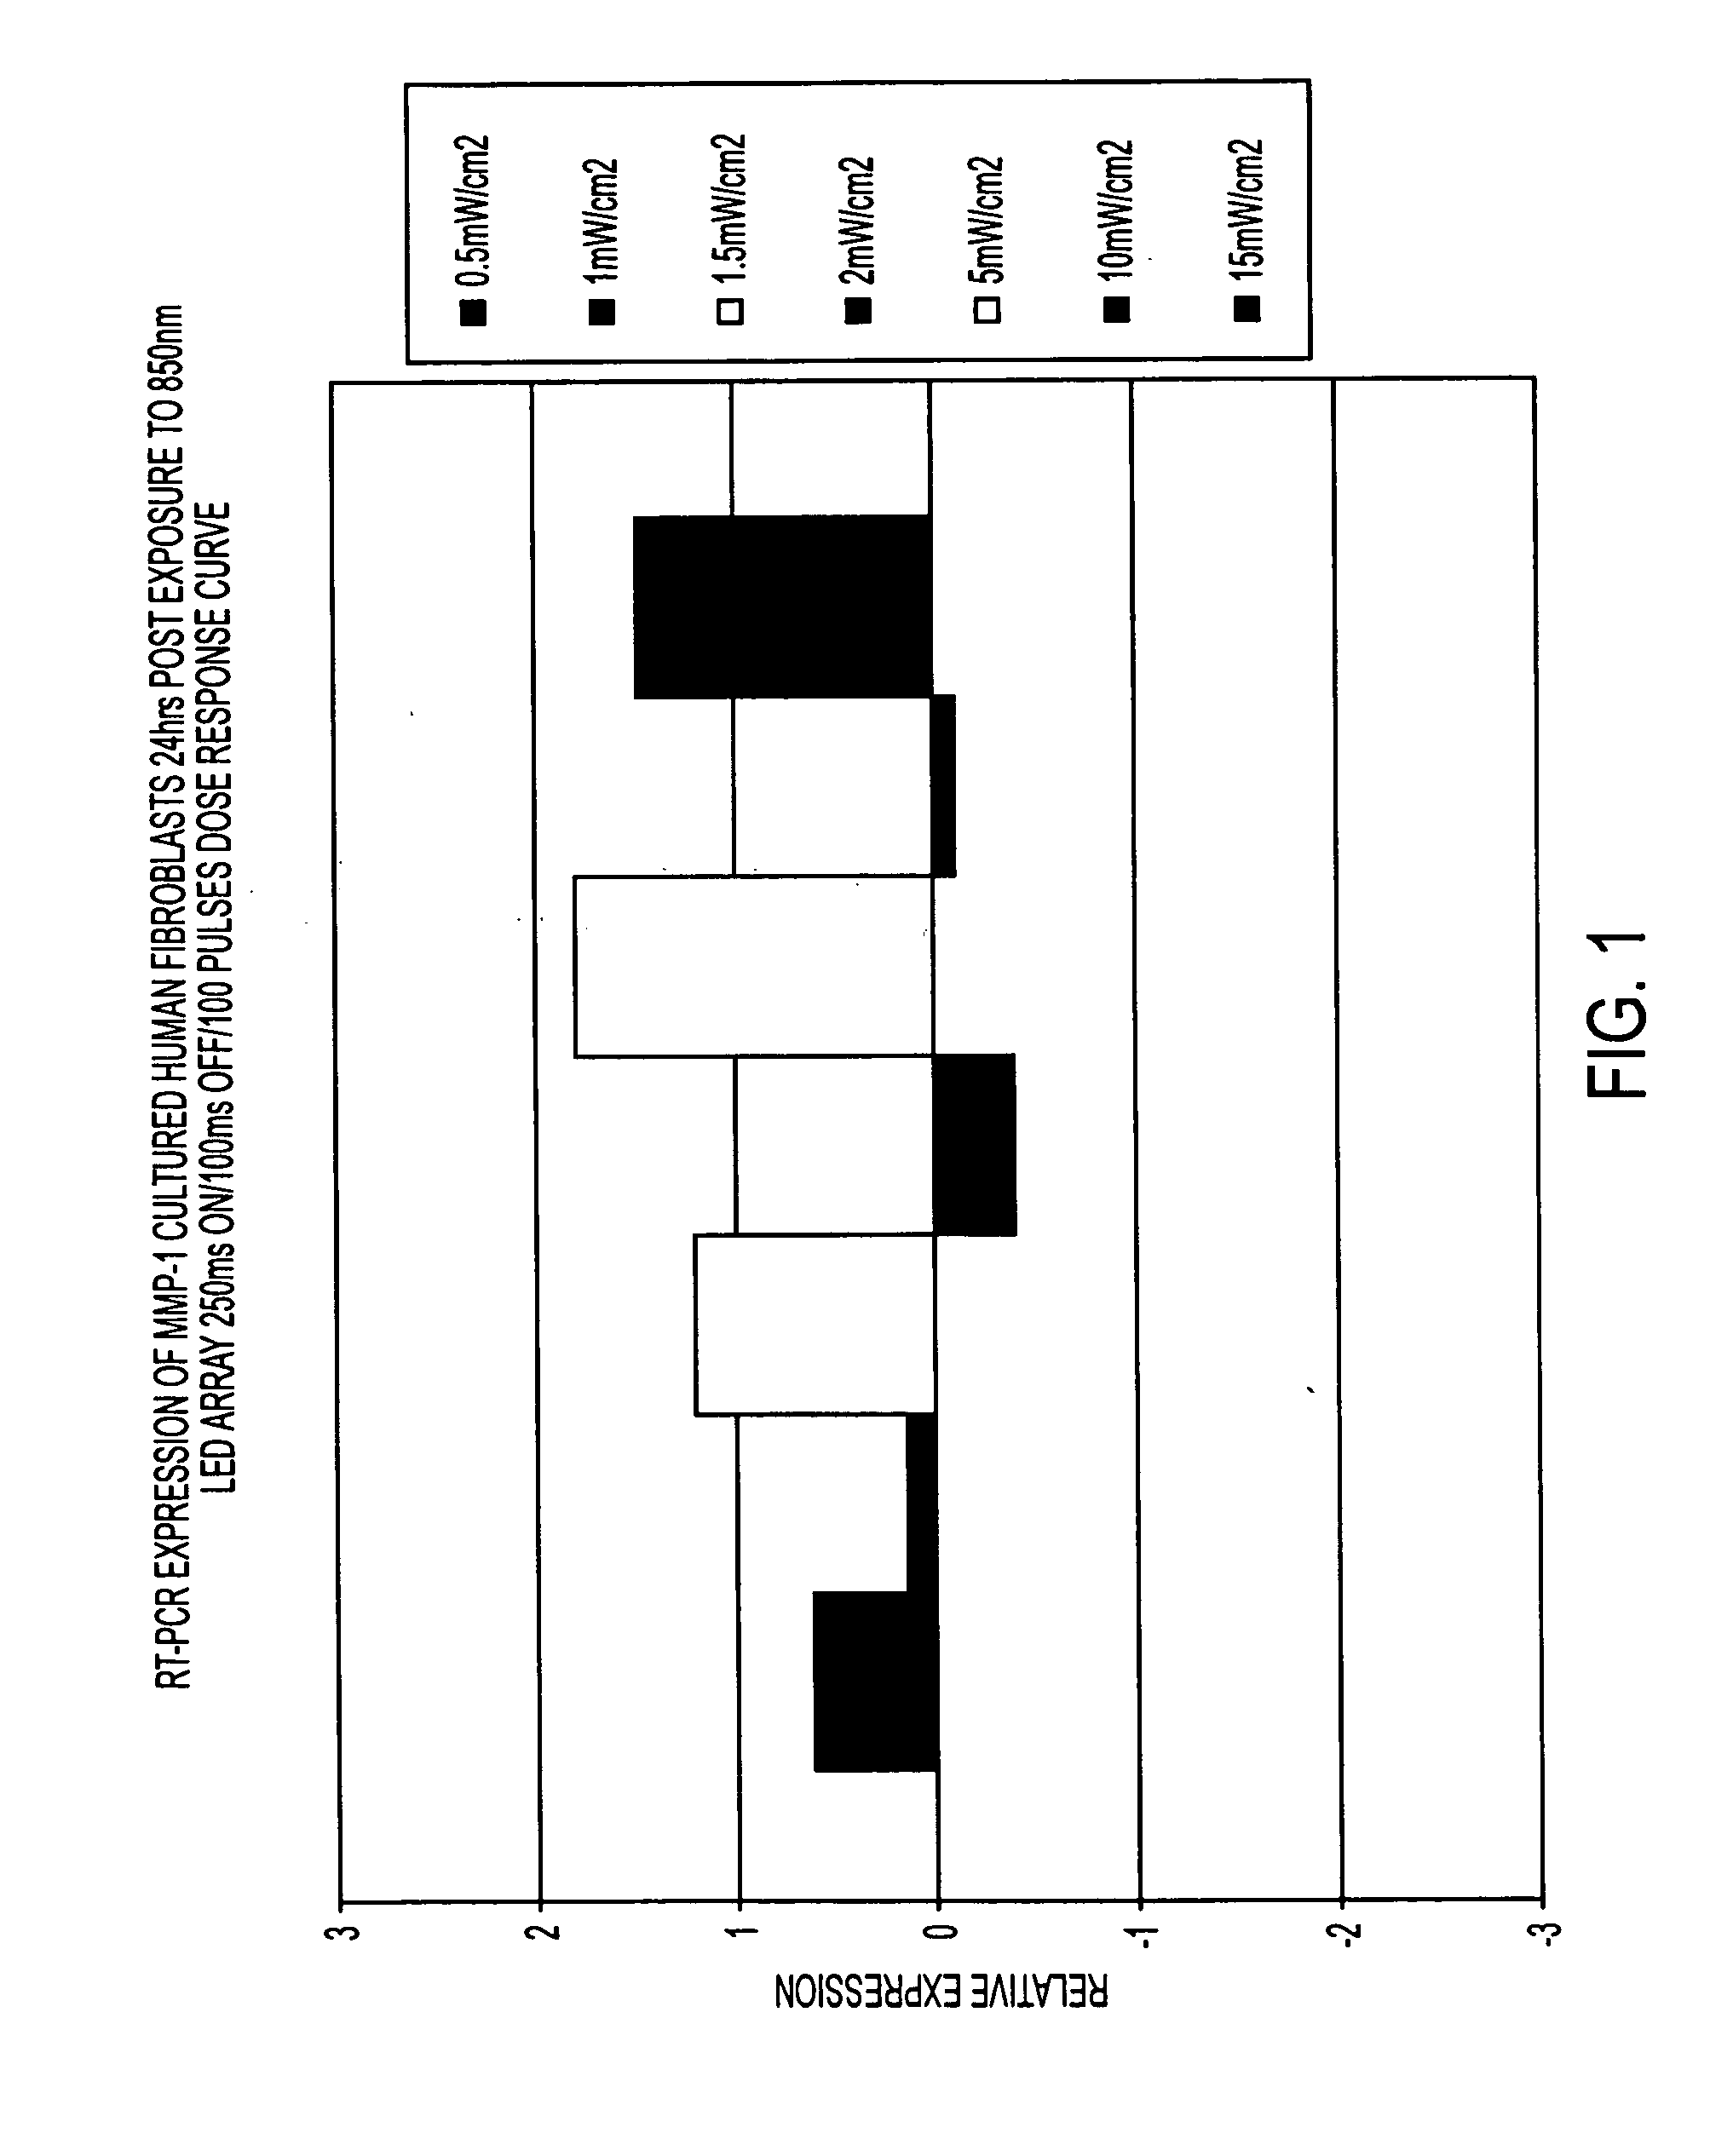 System and method for the photodynamic treatment of burns, wounds, and related skin disorders